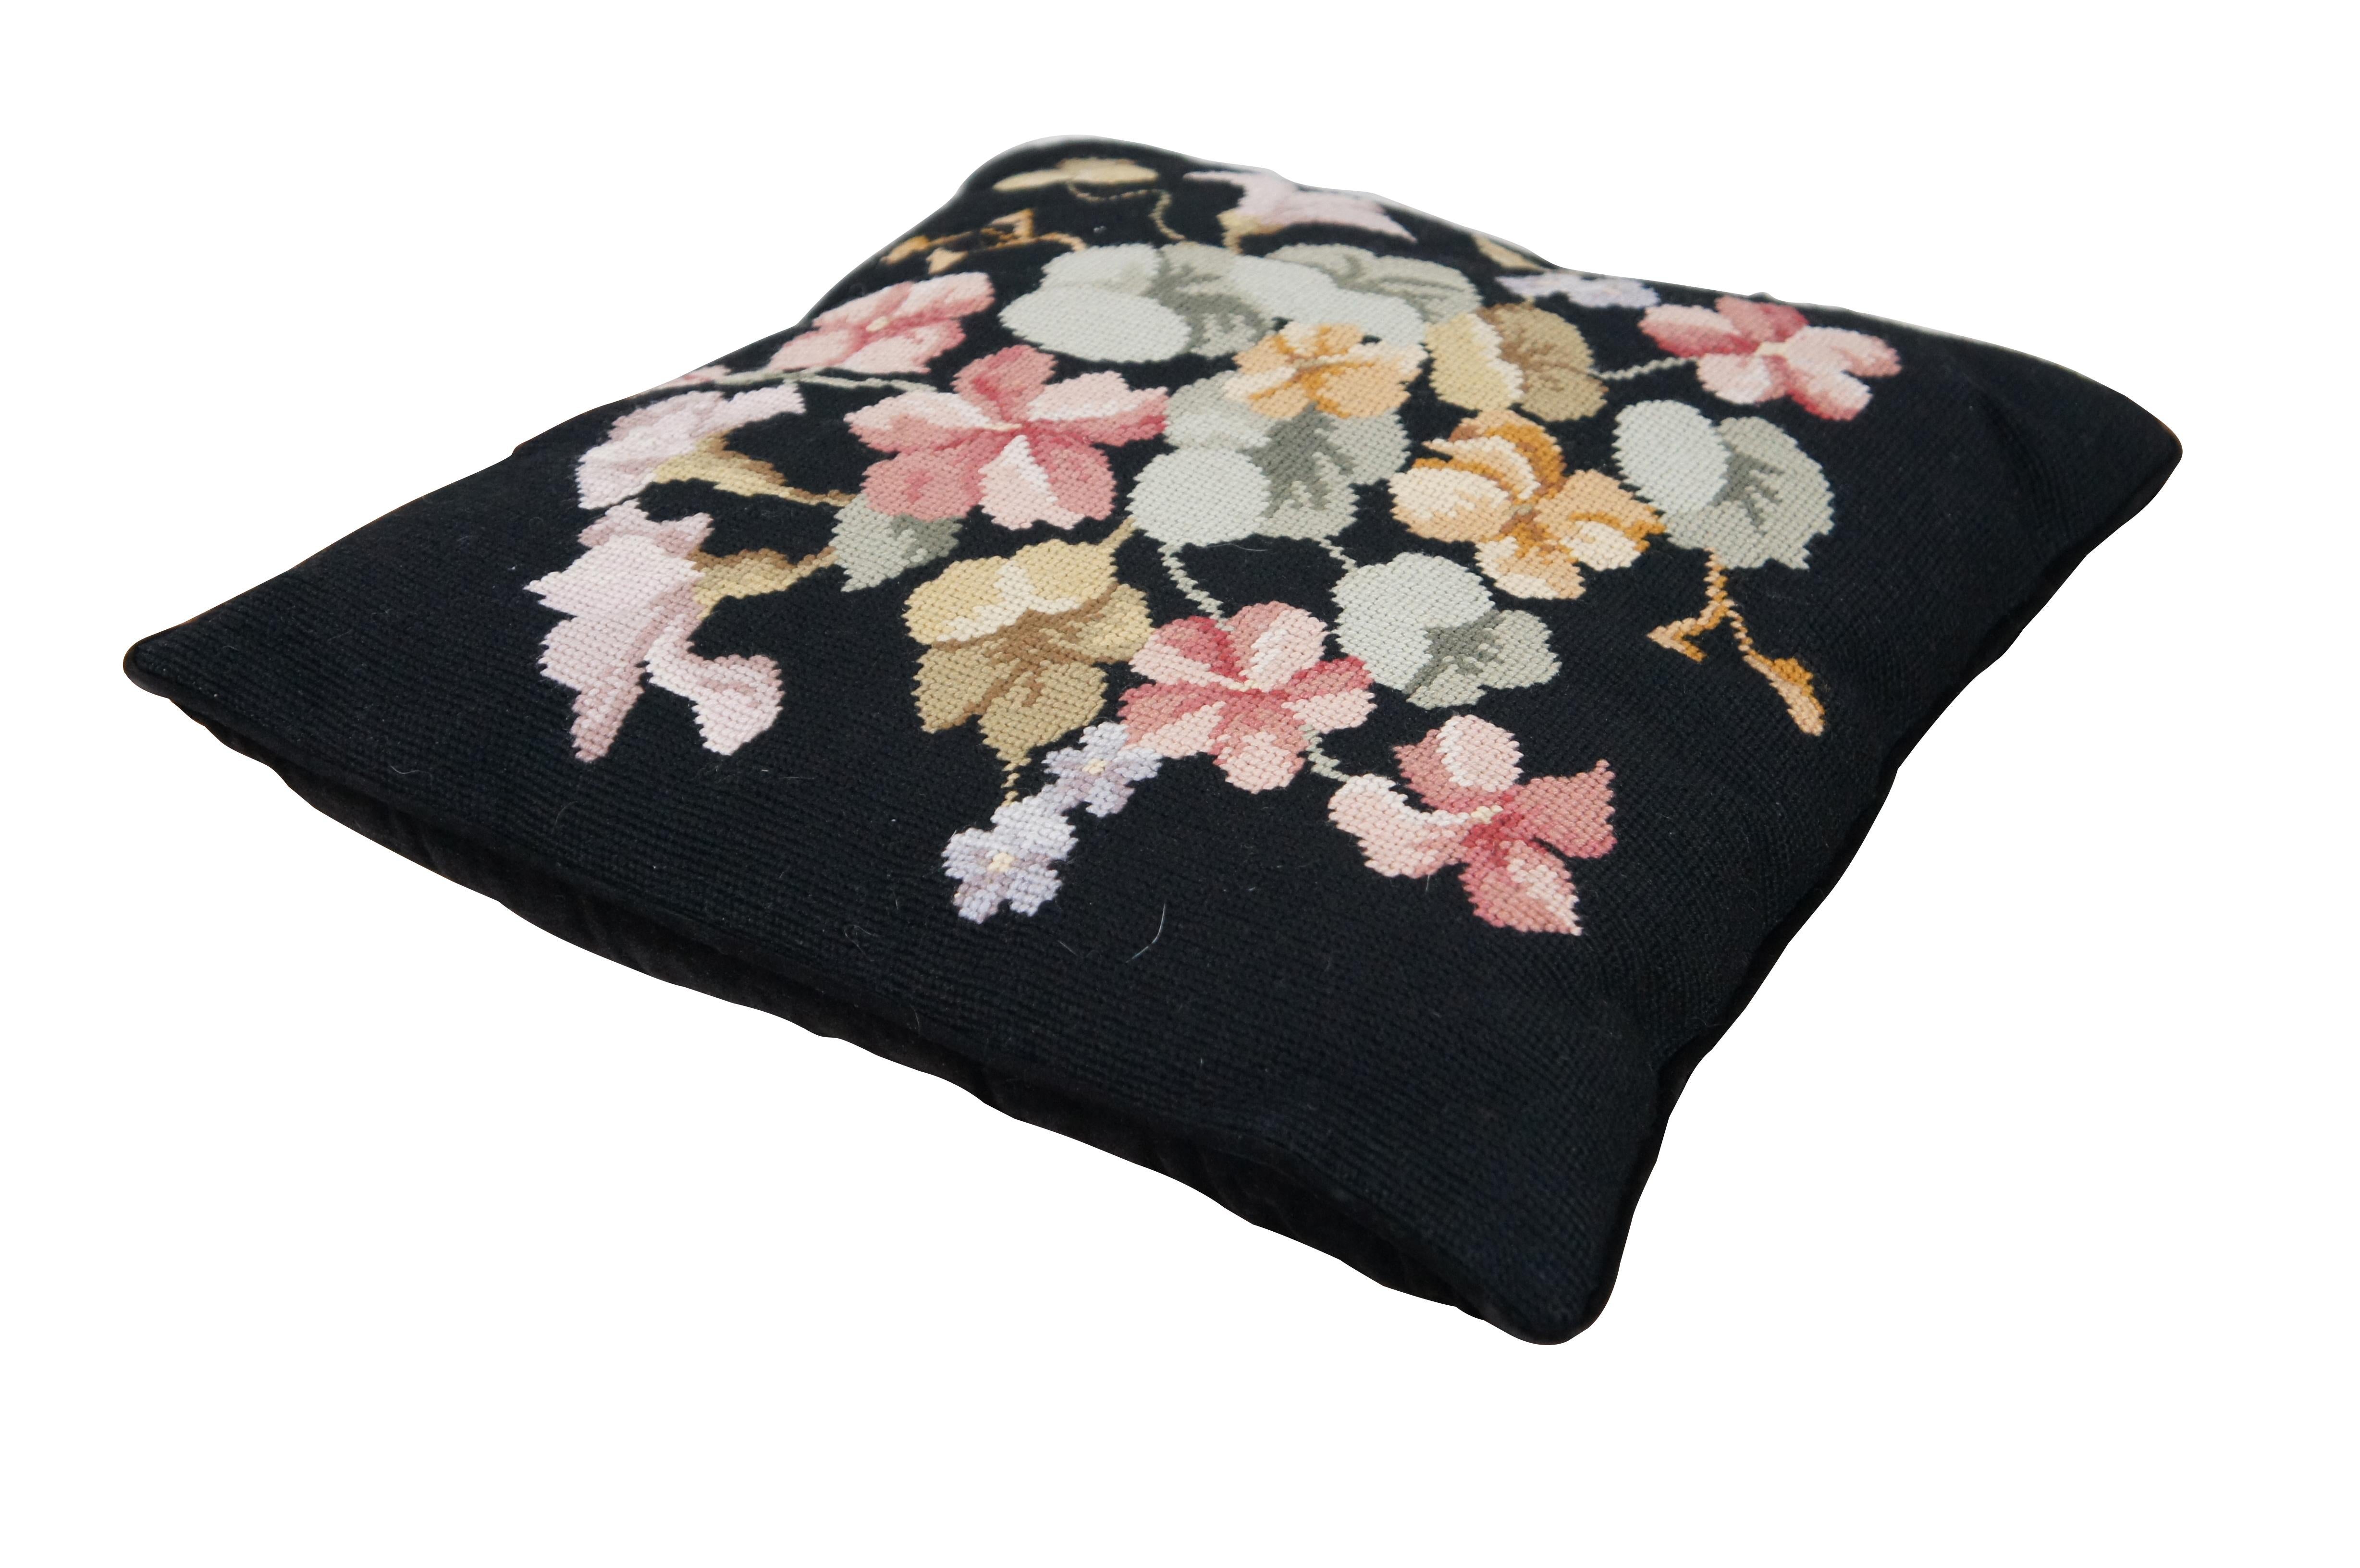 Vintage needlepoint / embroidered throw pillow featuring an array of flowers on a black background, with a black velvet back and fiber filled pillow form / insert. Zipper closure. handstitched but at least one other pillow with matching design /